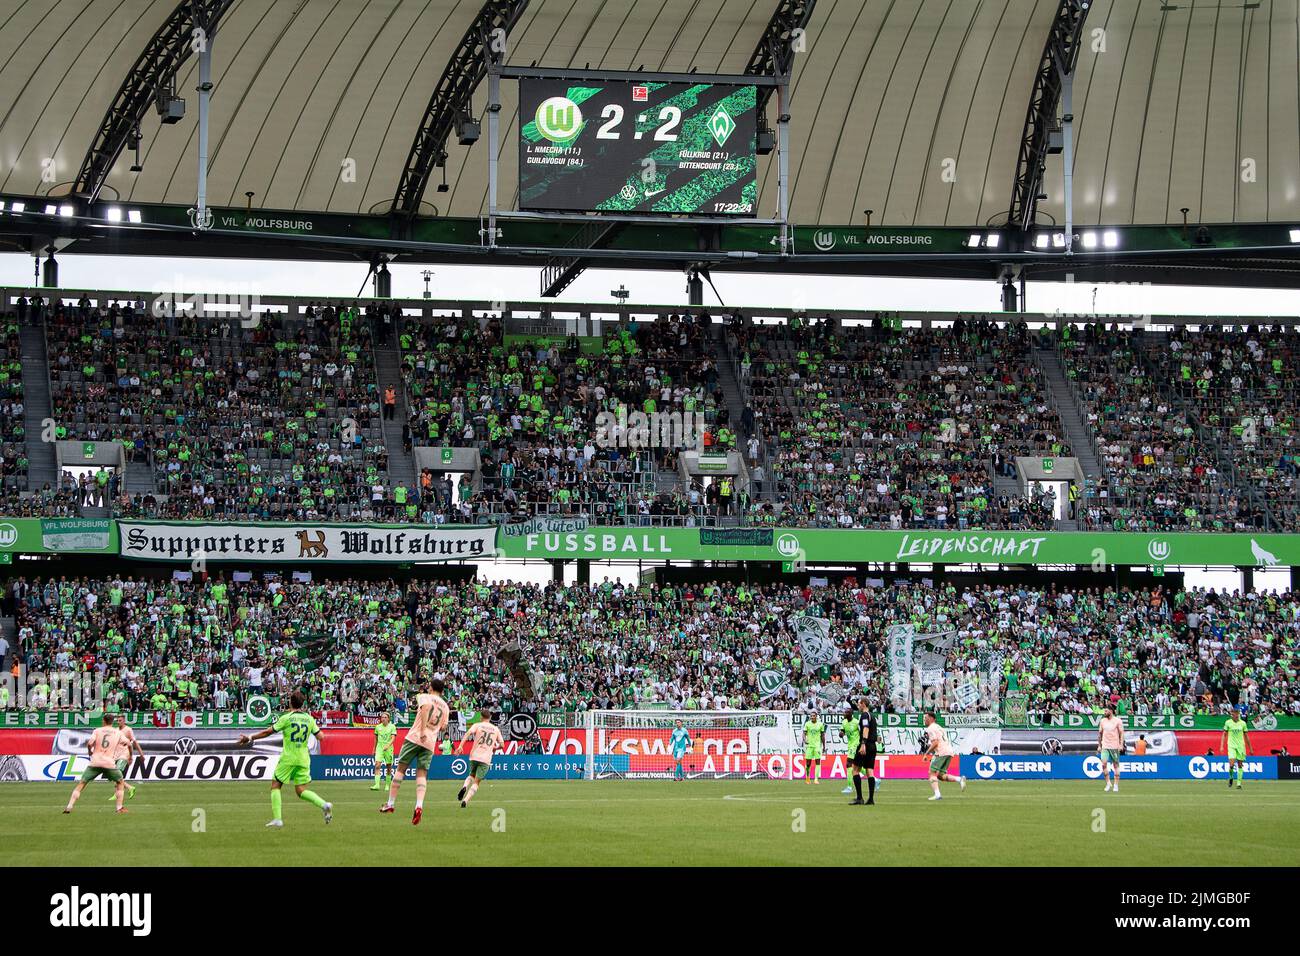 06 August 2022, Lower Saxony, Wolfsburg: Soccer, Bundesliga, VfL Wolfsburg - SV Werder Bremen, Matchday 1, Volkswagen Arena. The final score 2:2 is displayed on a video screen. Photo: Swen Pförtner/dpa - IMPORTANT NOTE: In accordance with the requirements of the DFL Deutsche Fußball Liga and the DFB Deutscher Fußball-Bund, it is prohibited to use or have used photographs taken in the stadium and/or of the match in the form of sequence pictures and/or video-like photo series. Stock Photo